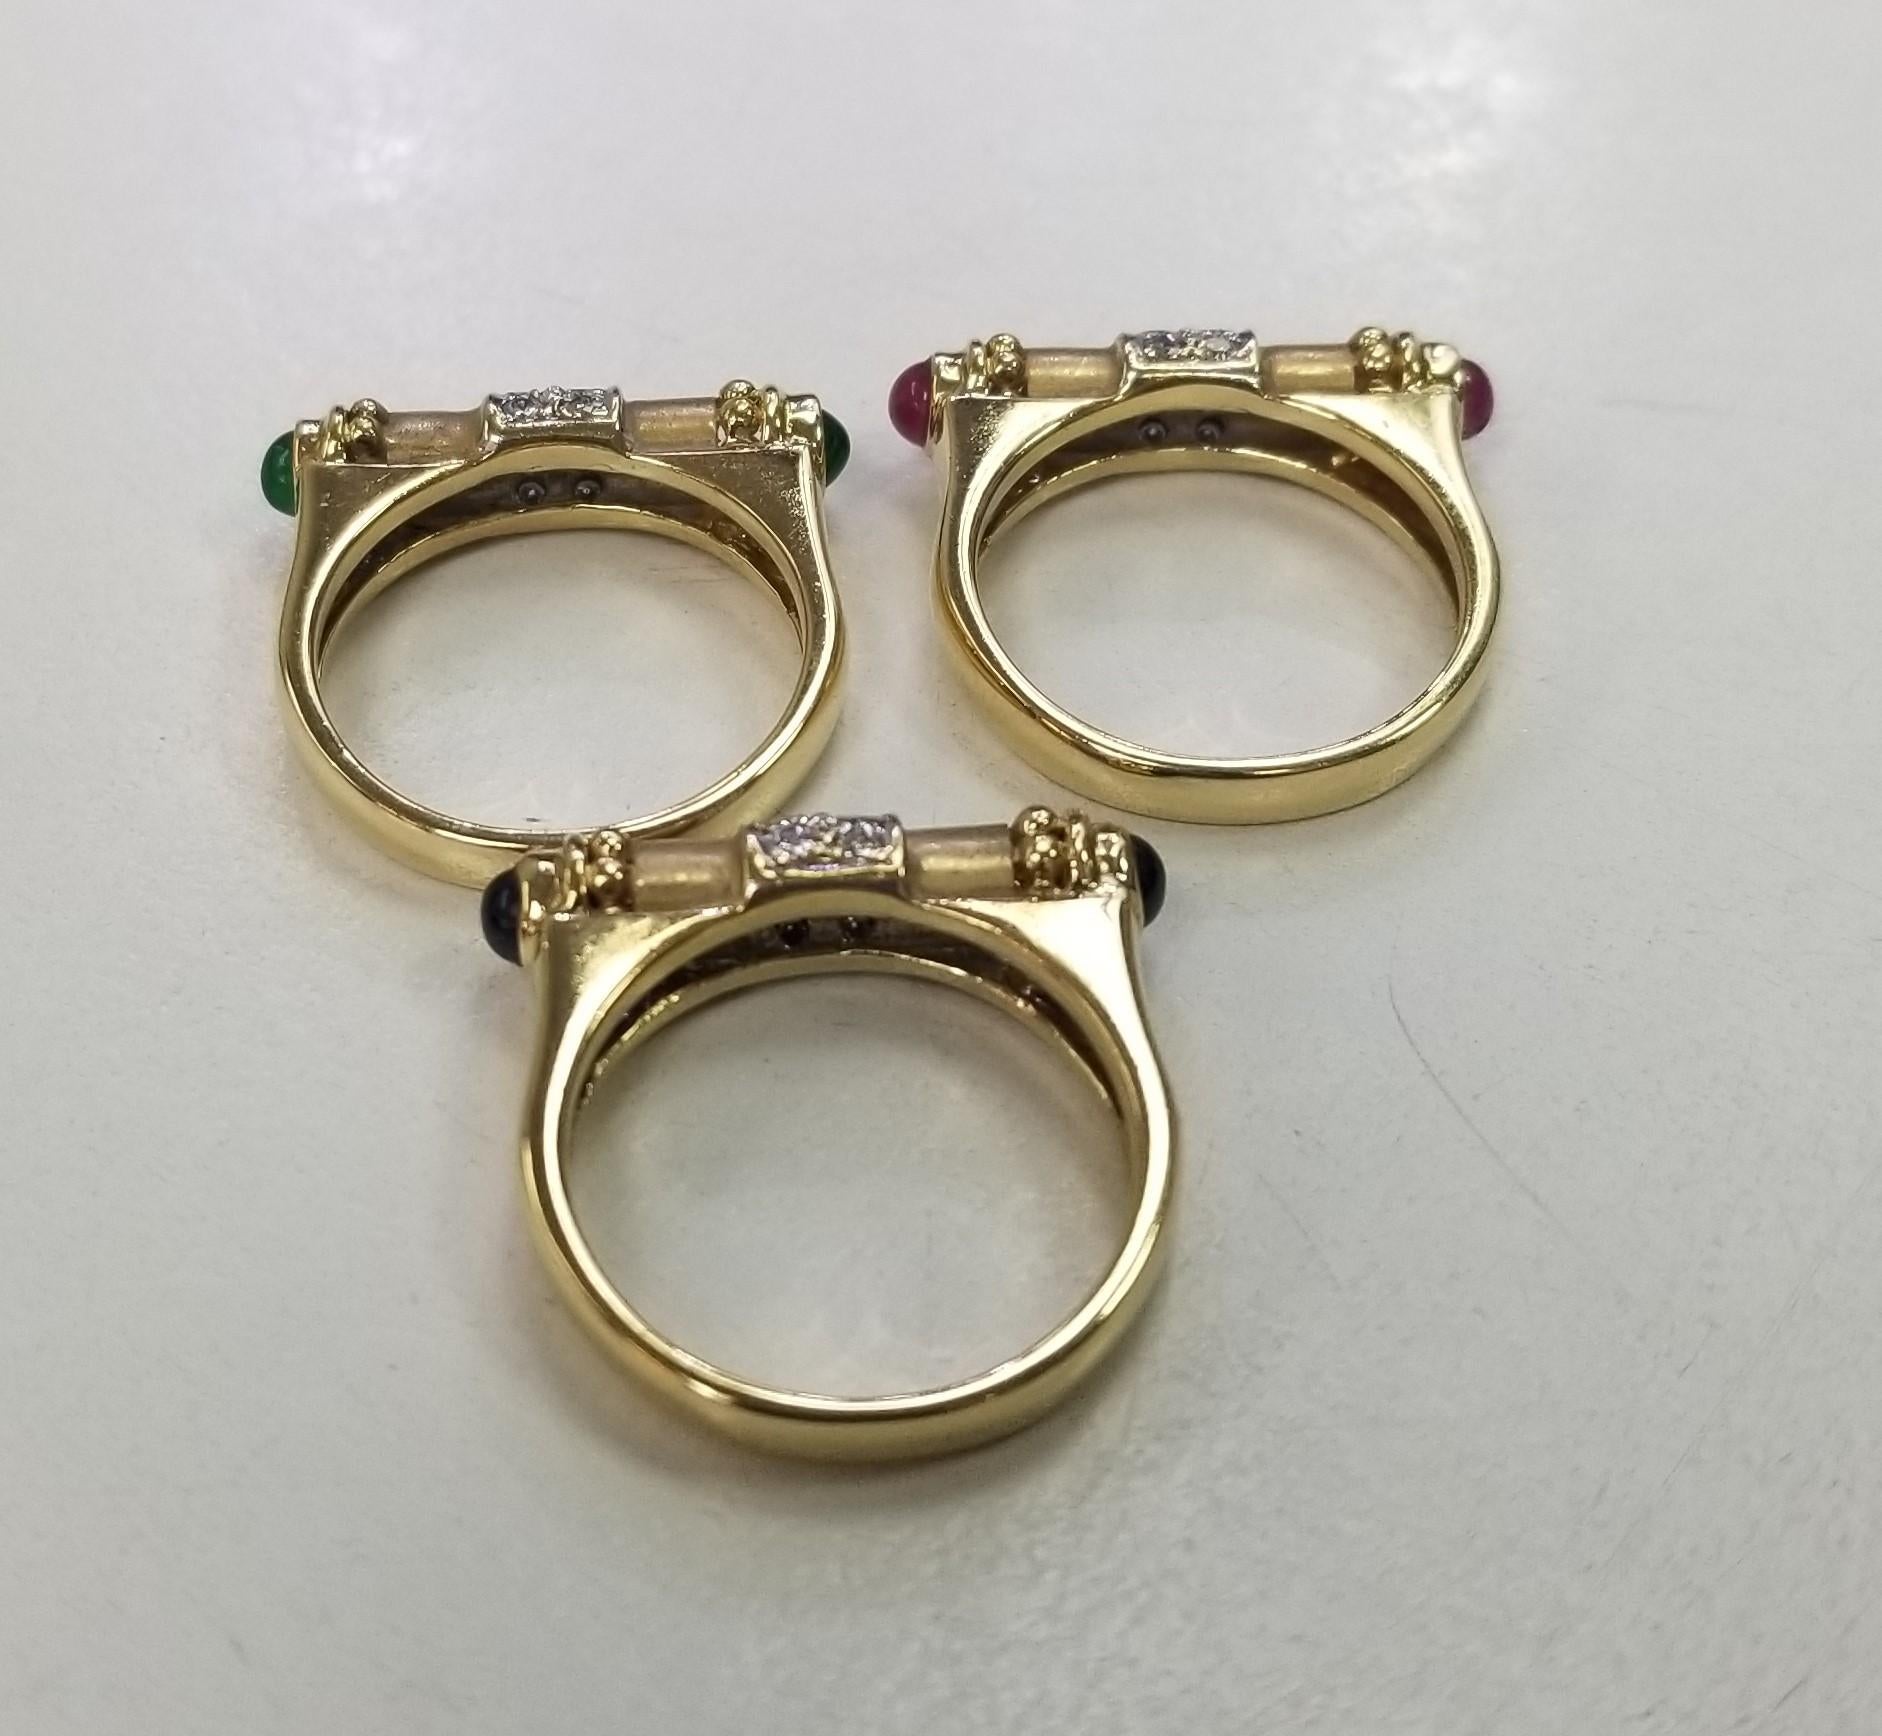 *Motivated to Sell – Please make a Fair Offer*
*Set of 3 rings*
Here is a beautiful 